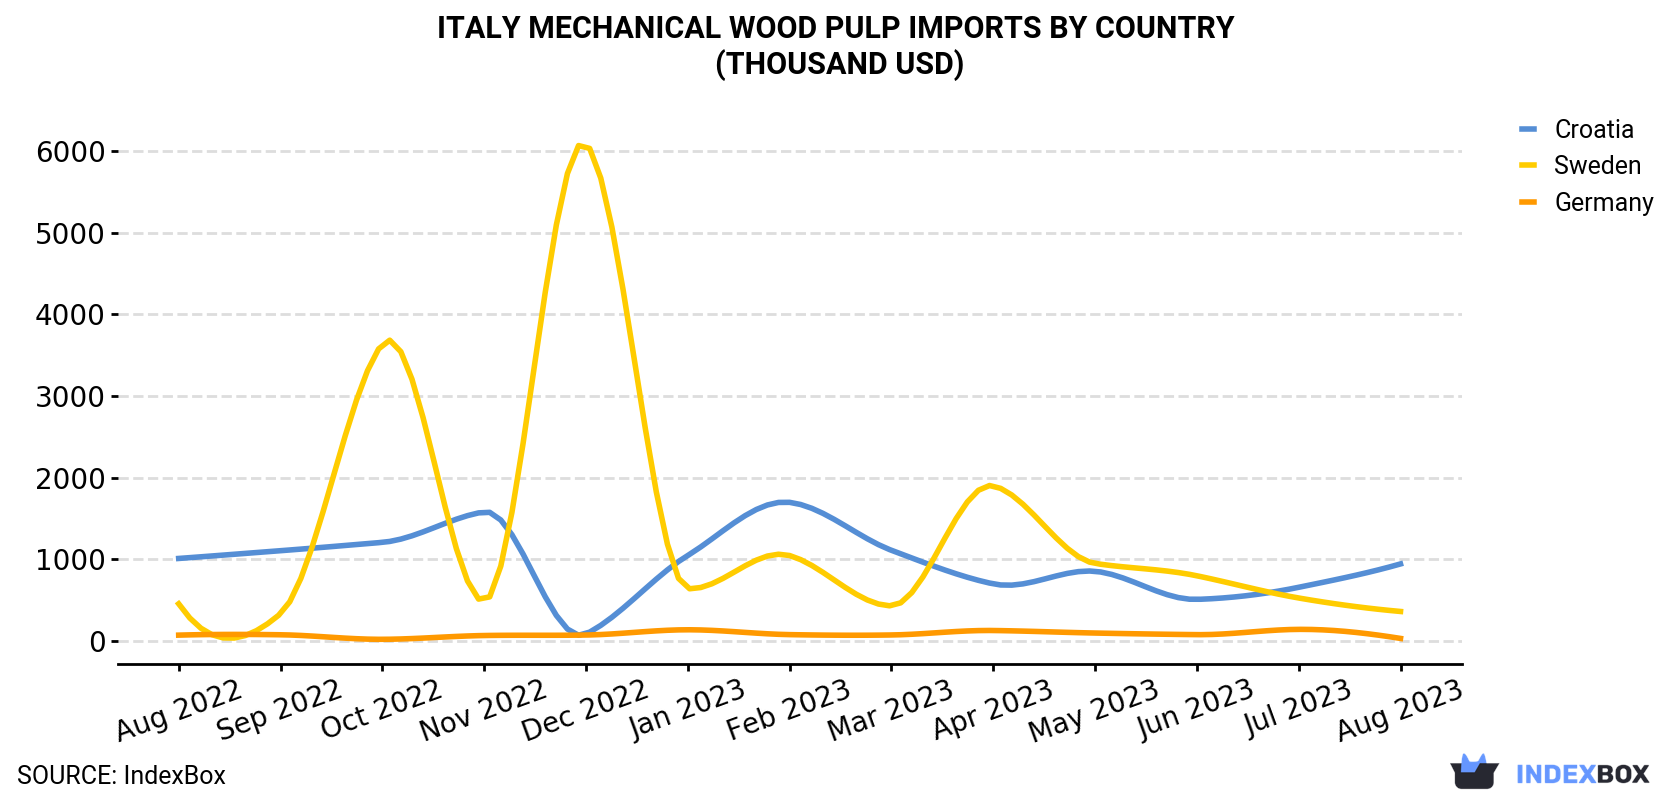 Italy Mechanical Wood Pulp Imports By Country (Thousand USD)